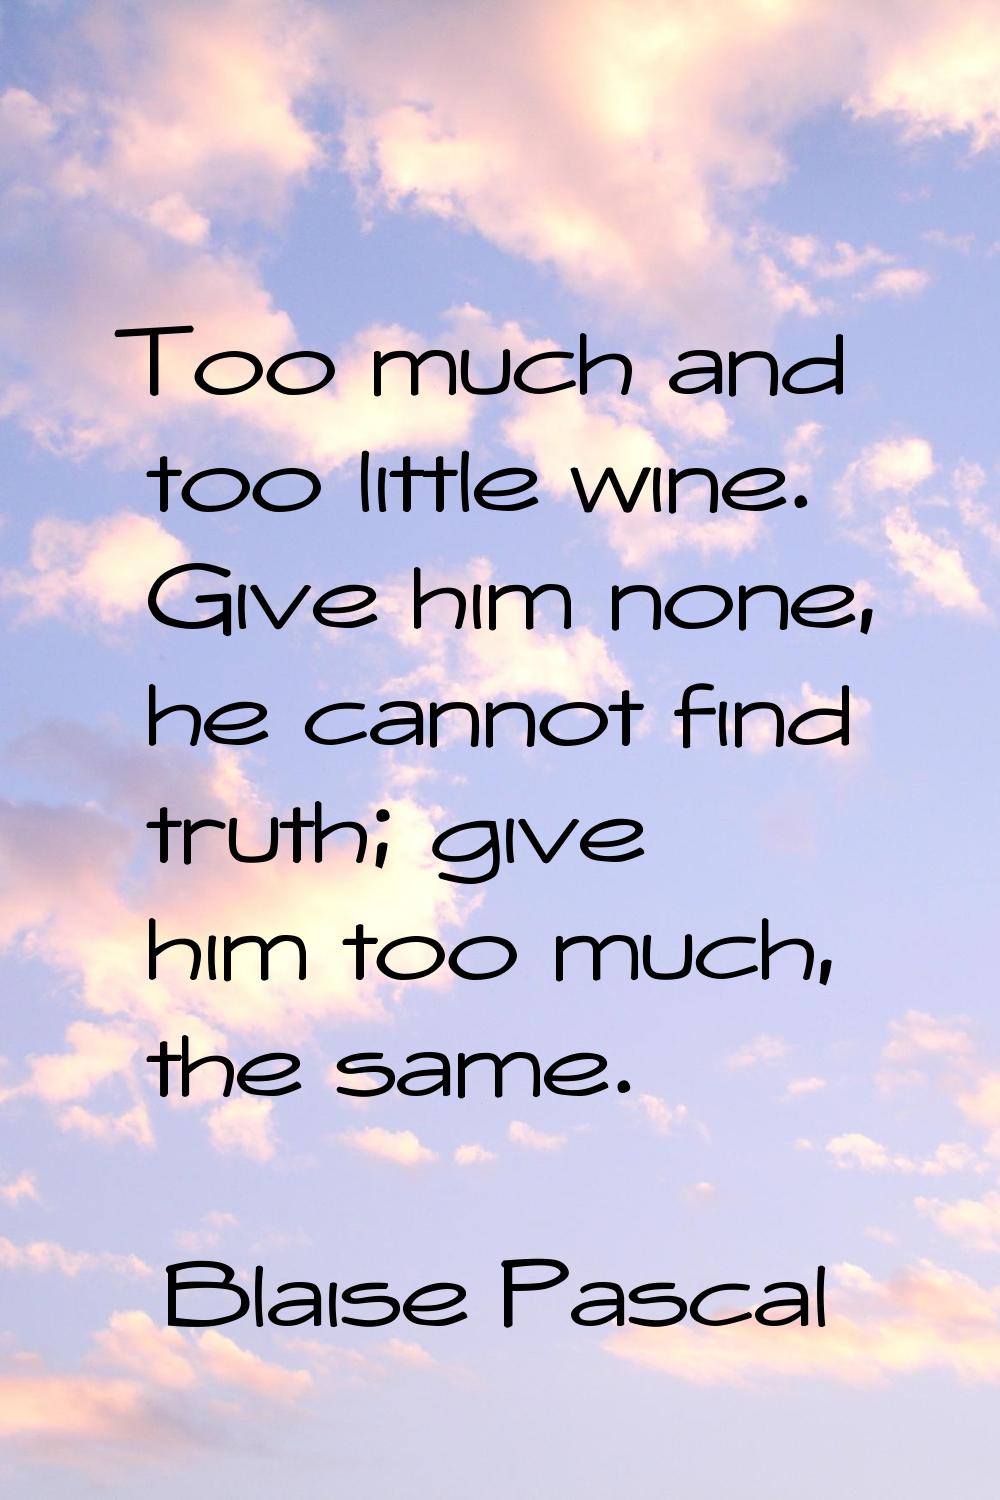 Too much and too little wine. Give him none, he cannot find truth; give him too much, the same.